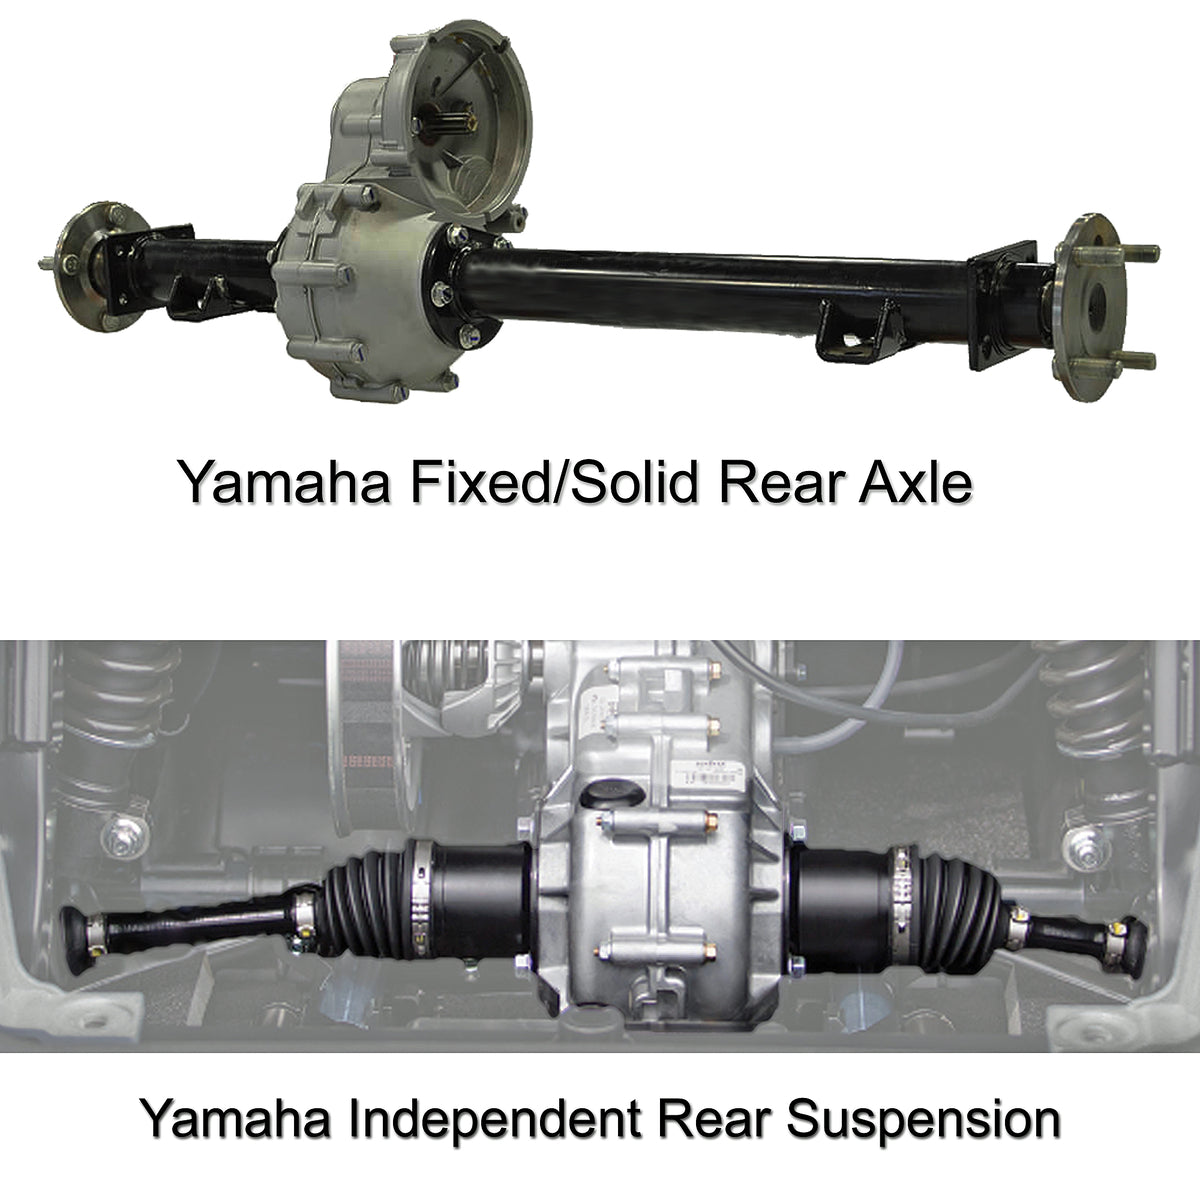 4” GTW Double A-Arm Lift Kit for Yamaha G29/Drive & Drive2 with Solid/Fixed Rear Axle